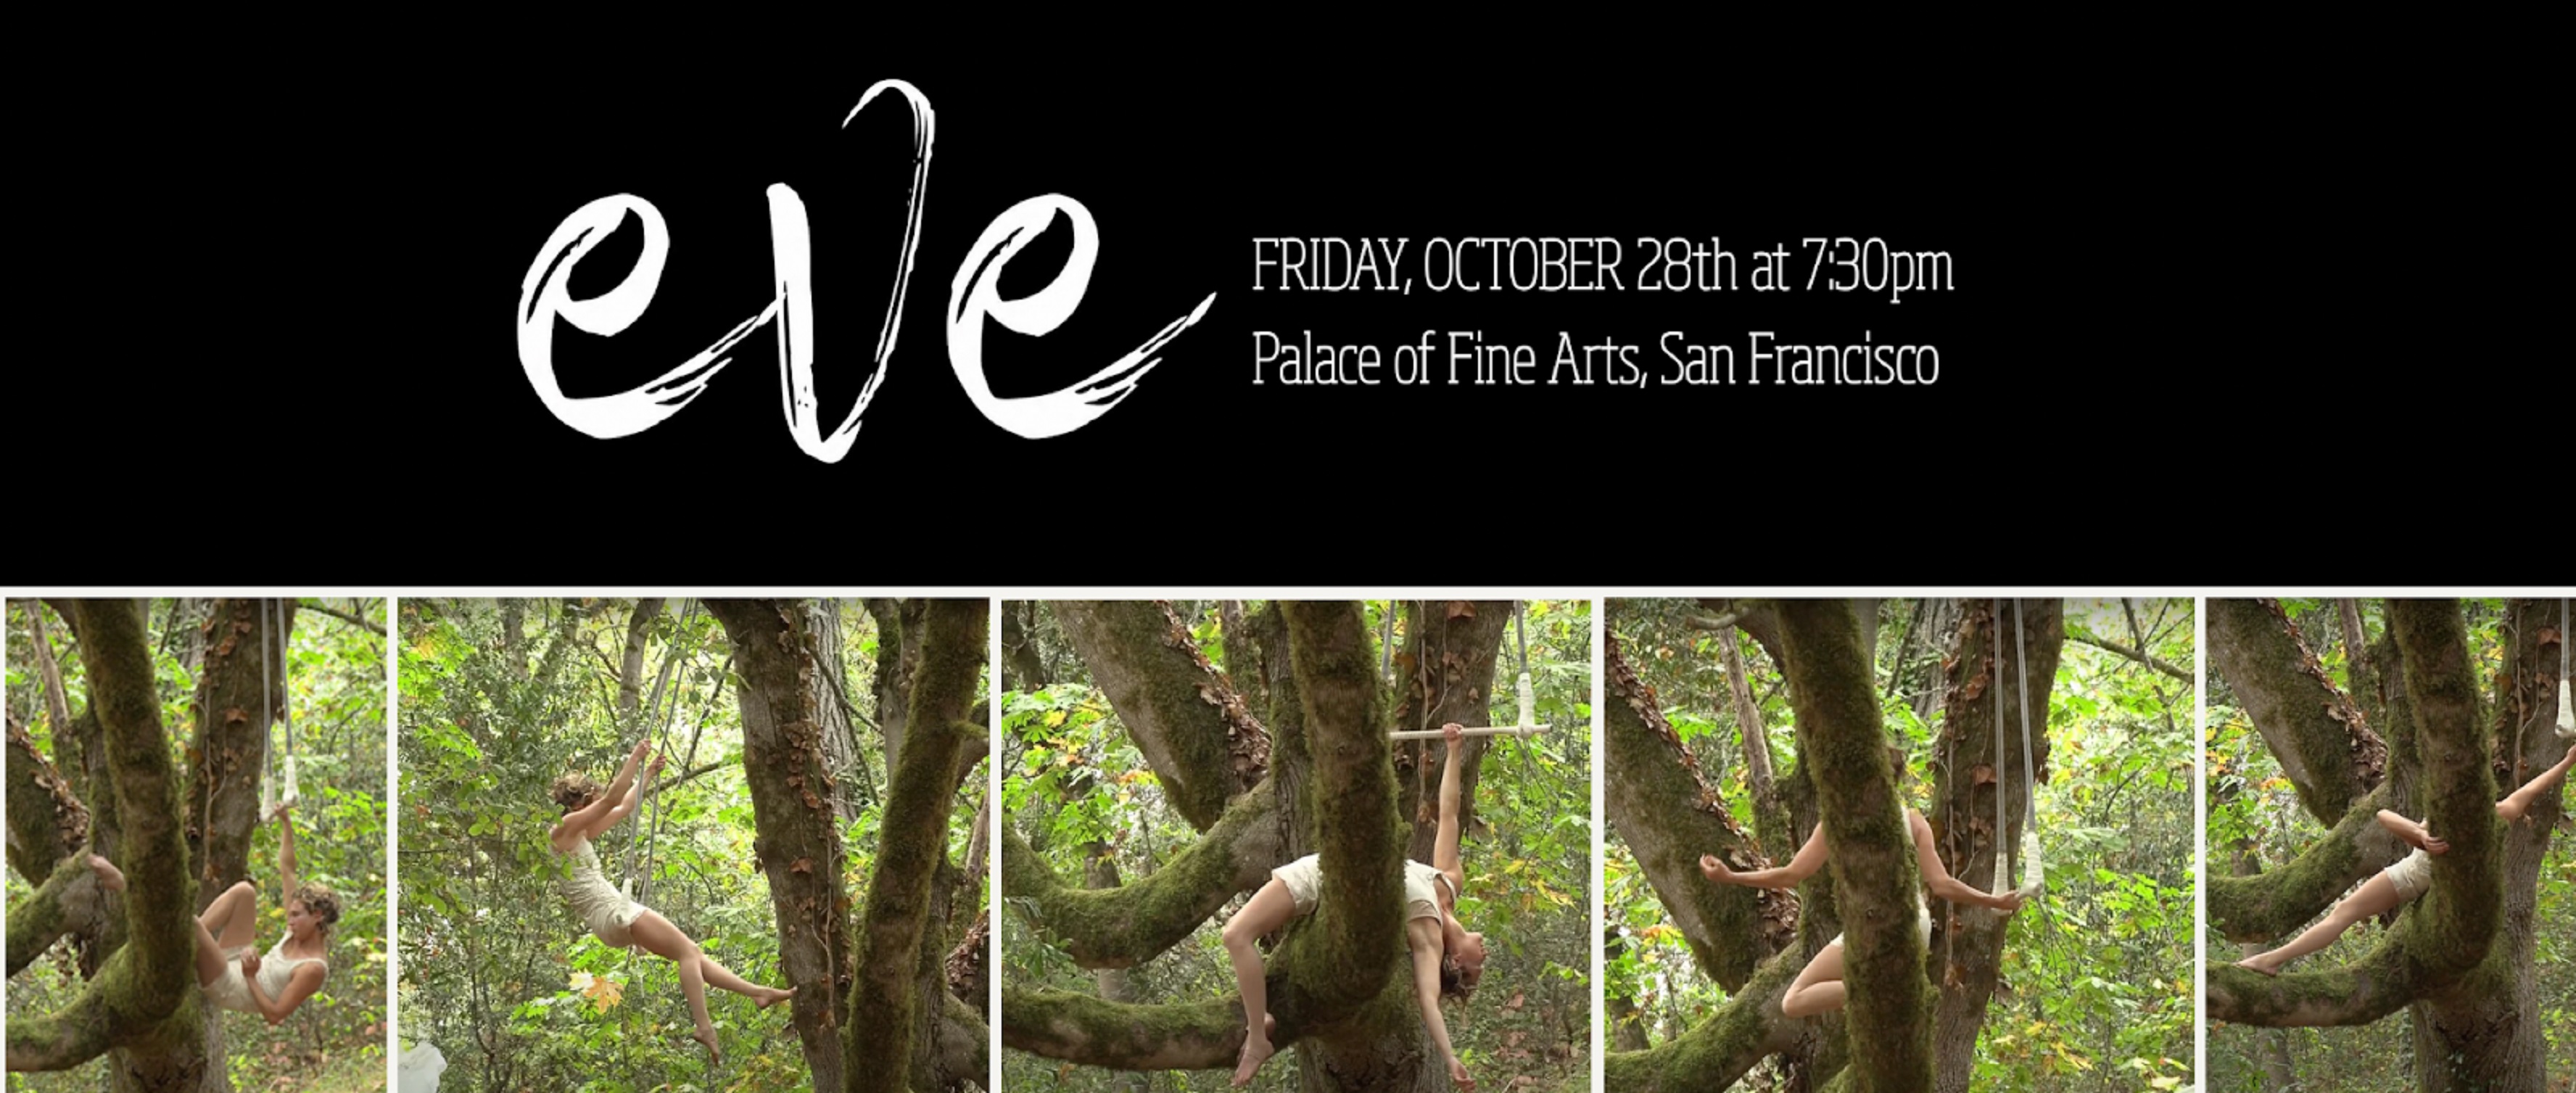 Stunning, multi-genre "Eve, An Opera" explores exploitation & power of healing, 10/28 in SF